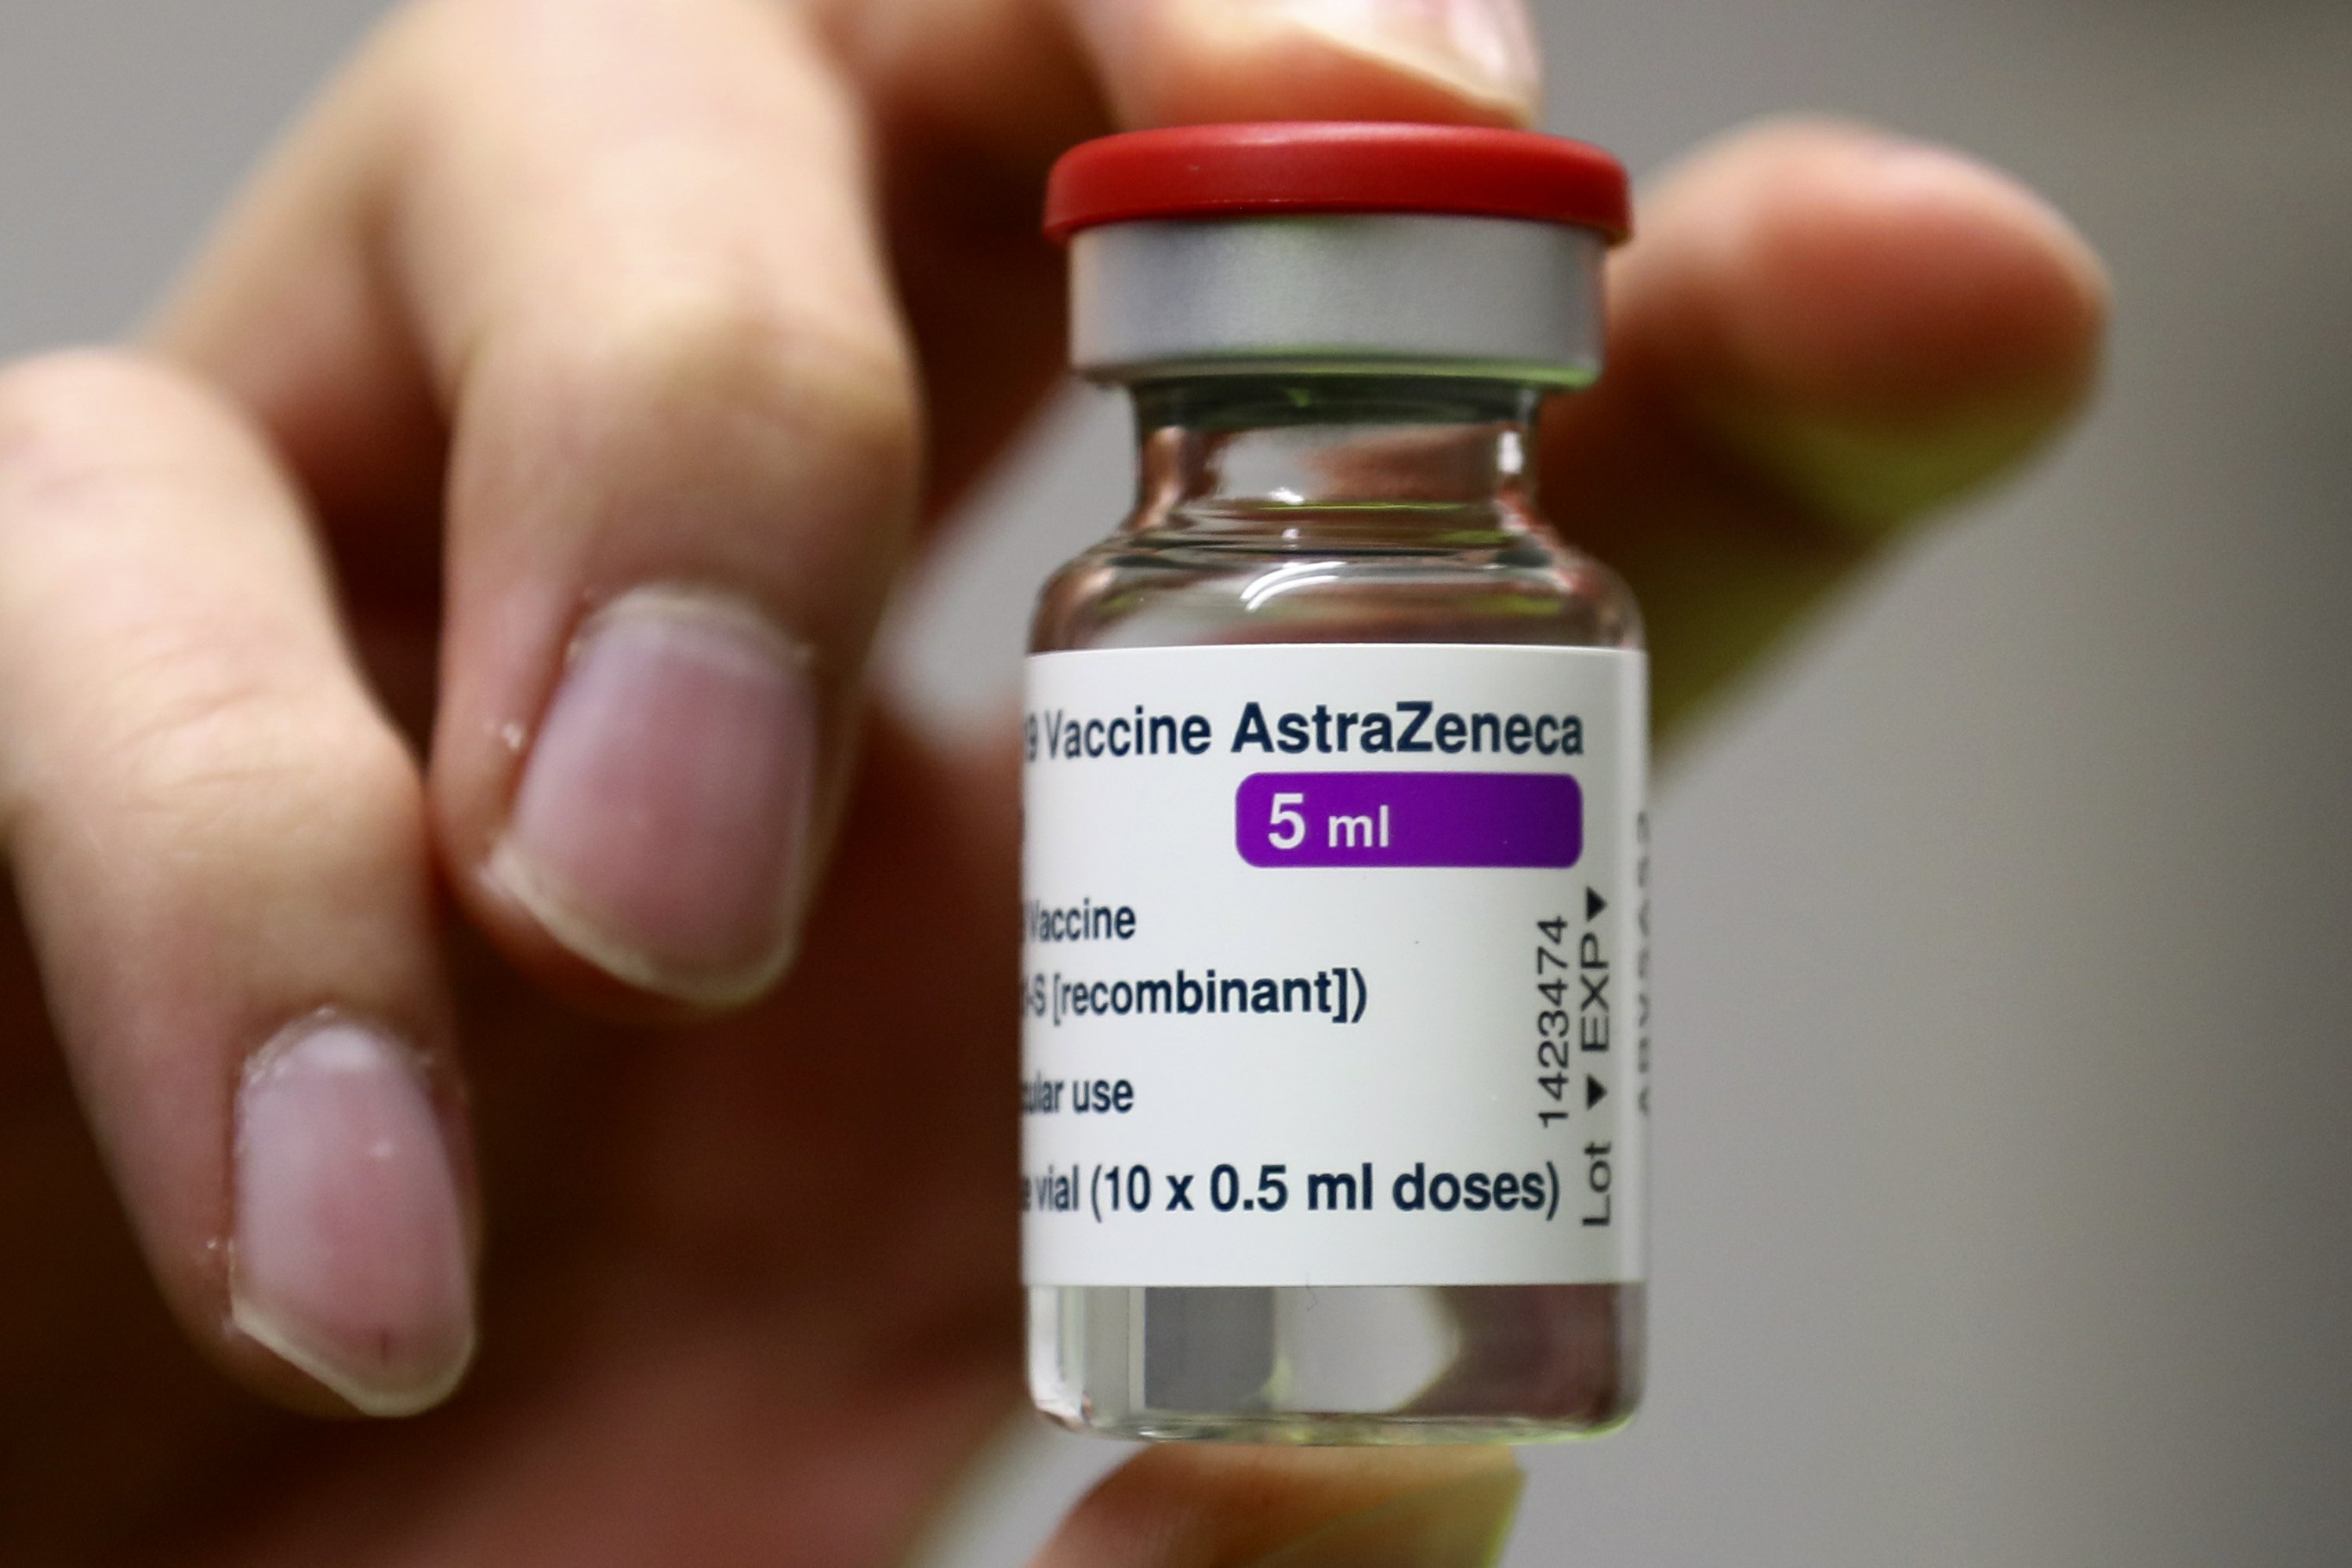 AstraZeneca may have used outdated information in vaccine testing